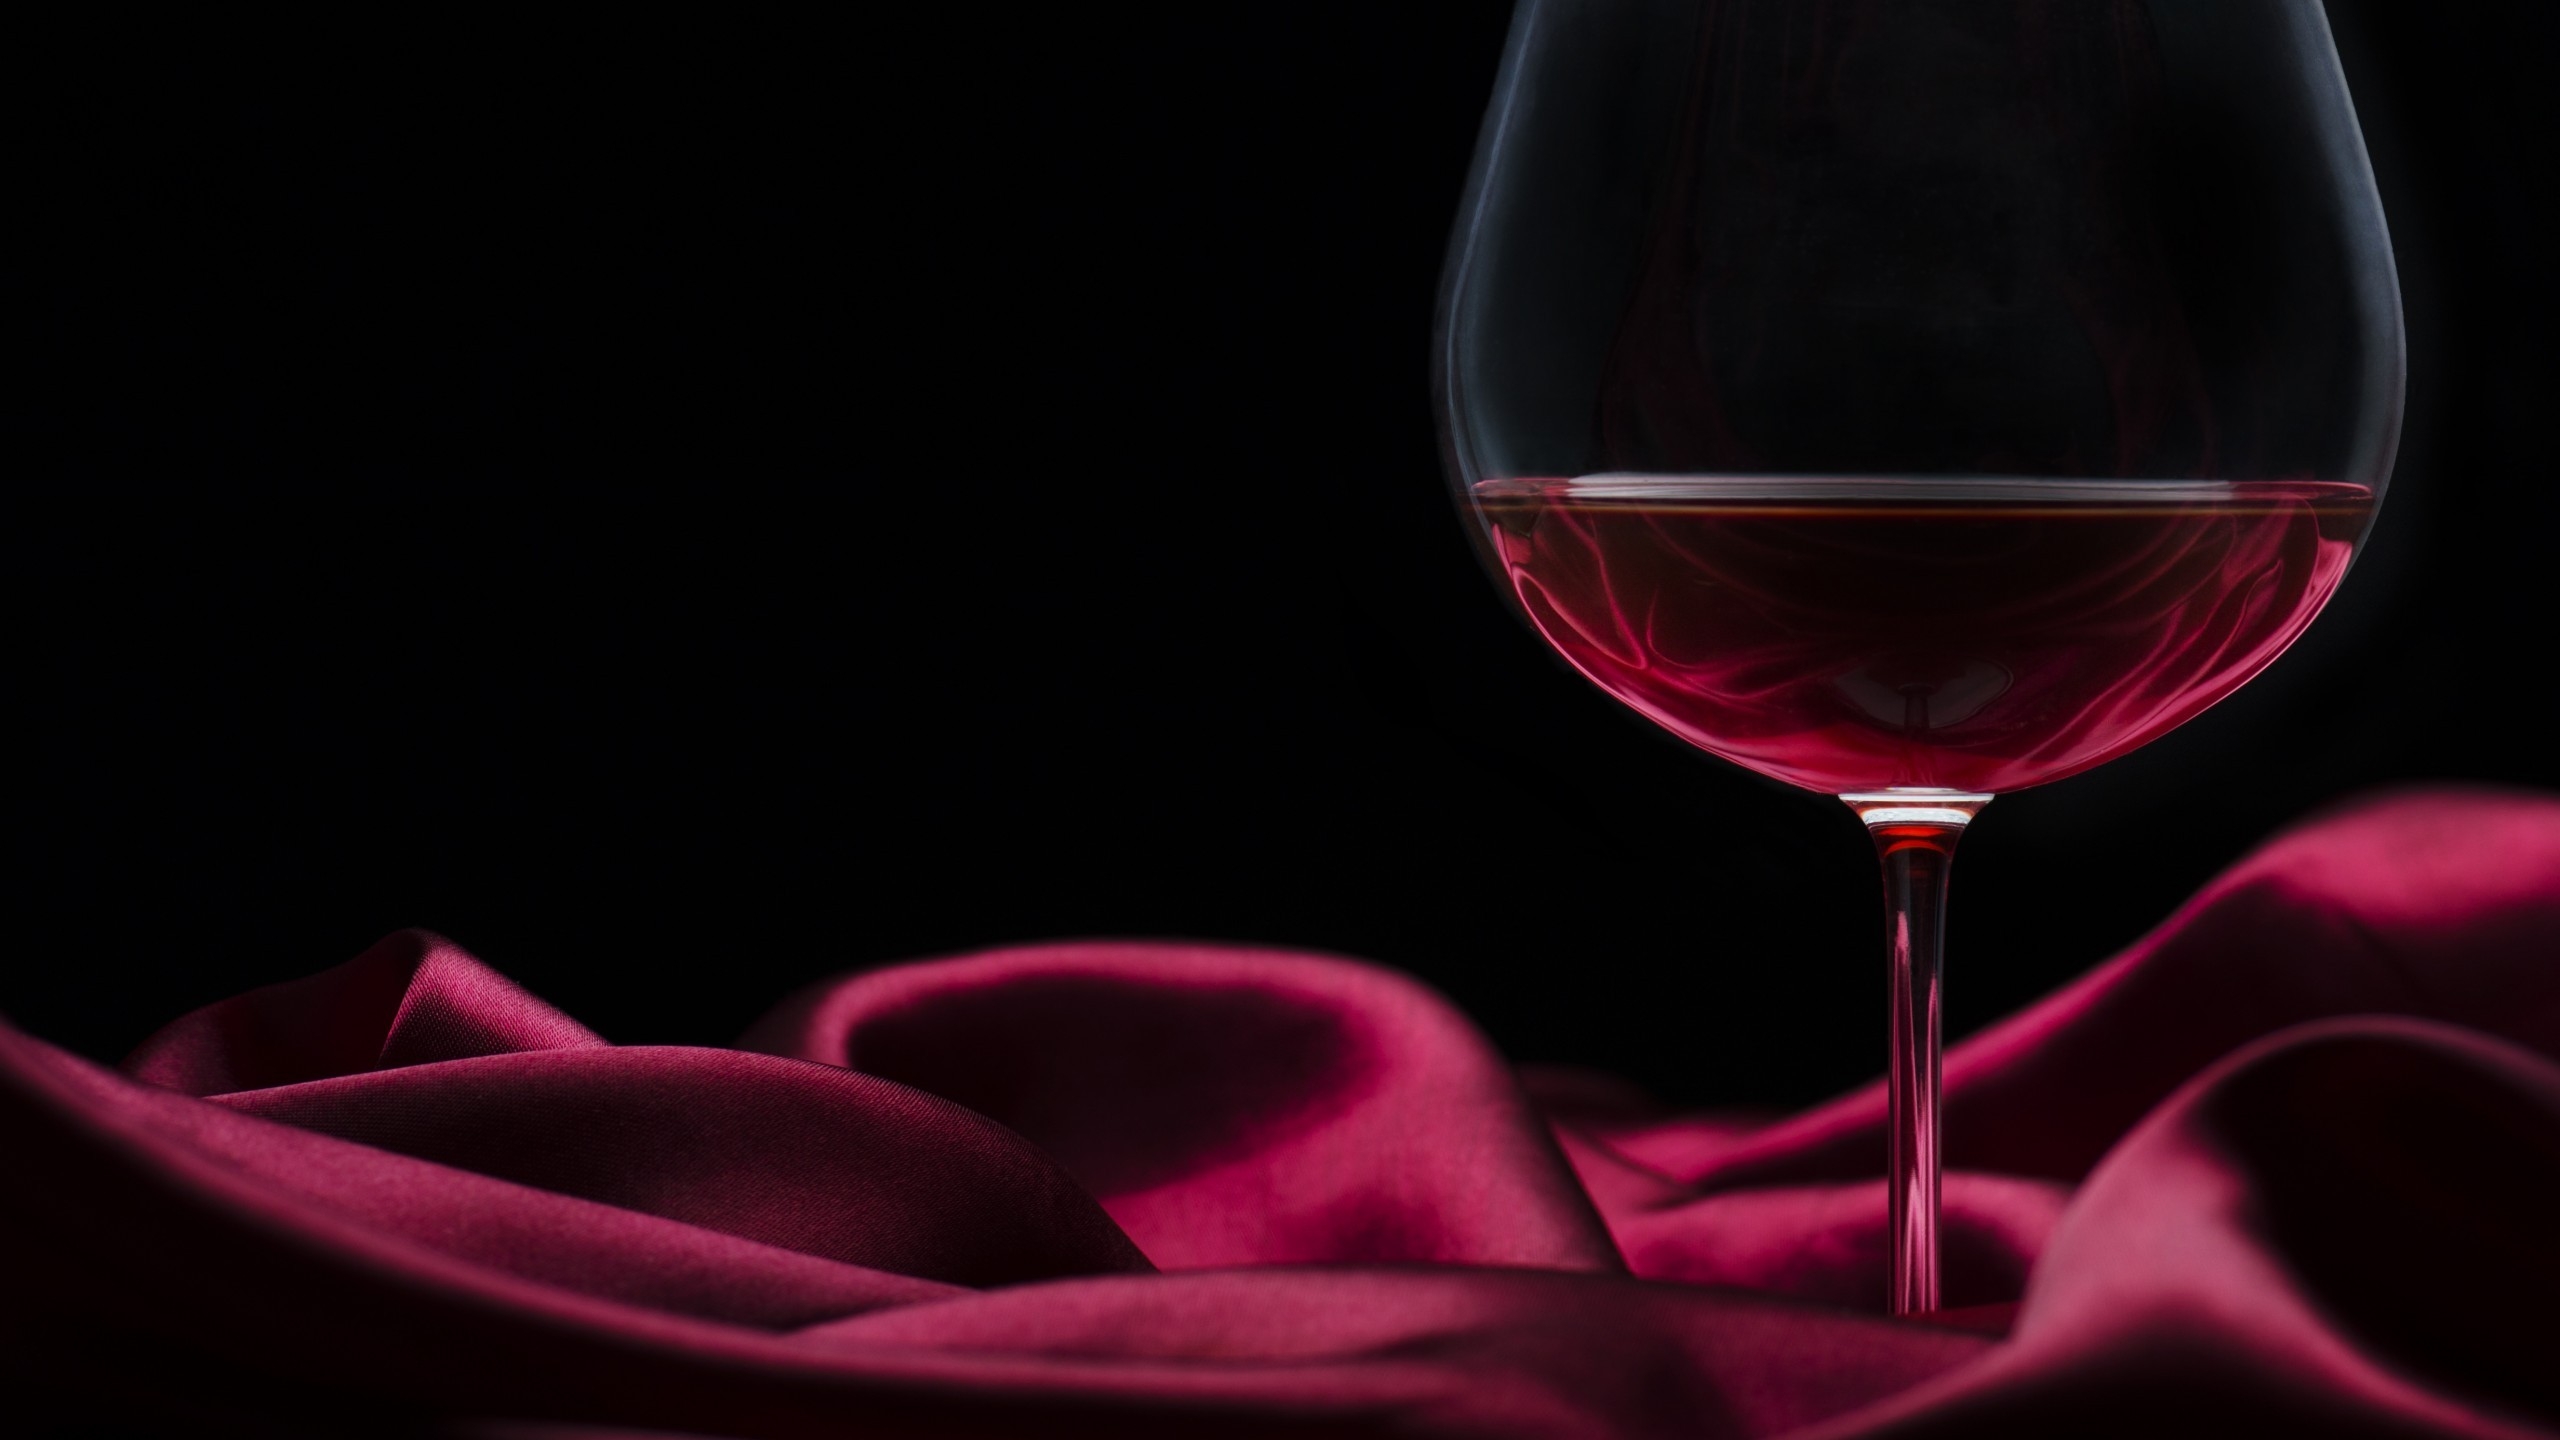 Red Wine for 2560x1440 HDTV resolution